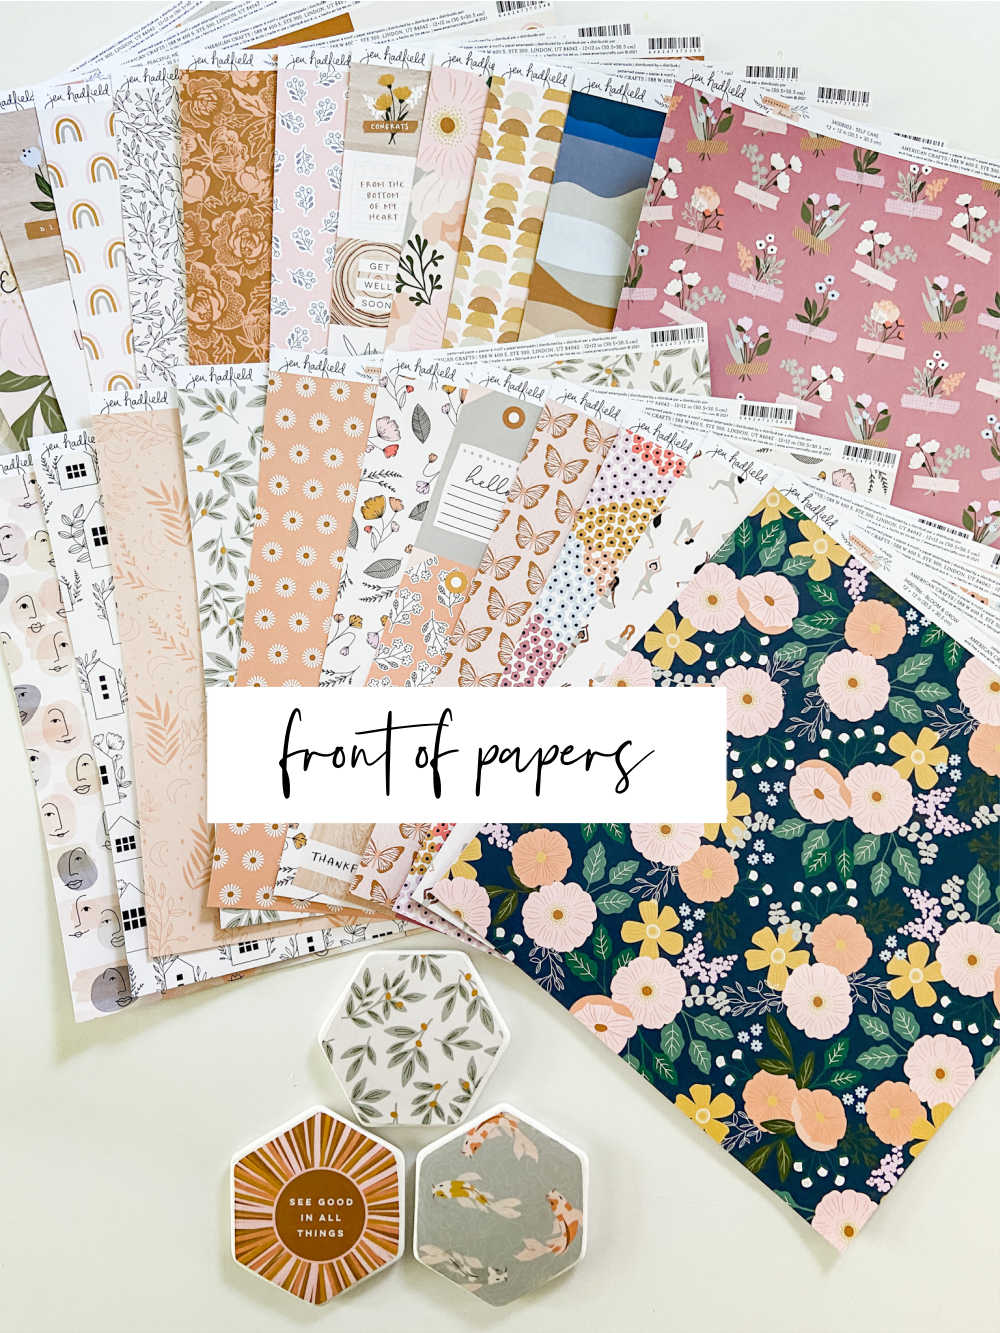 New Jen Hadfield Peaceful Heart Line! My new Pebbles paper and embellishment line with a cozy boho feel is available now! 